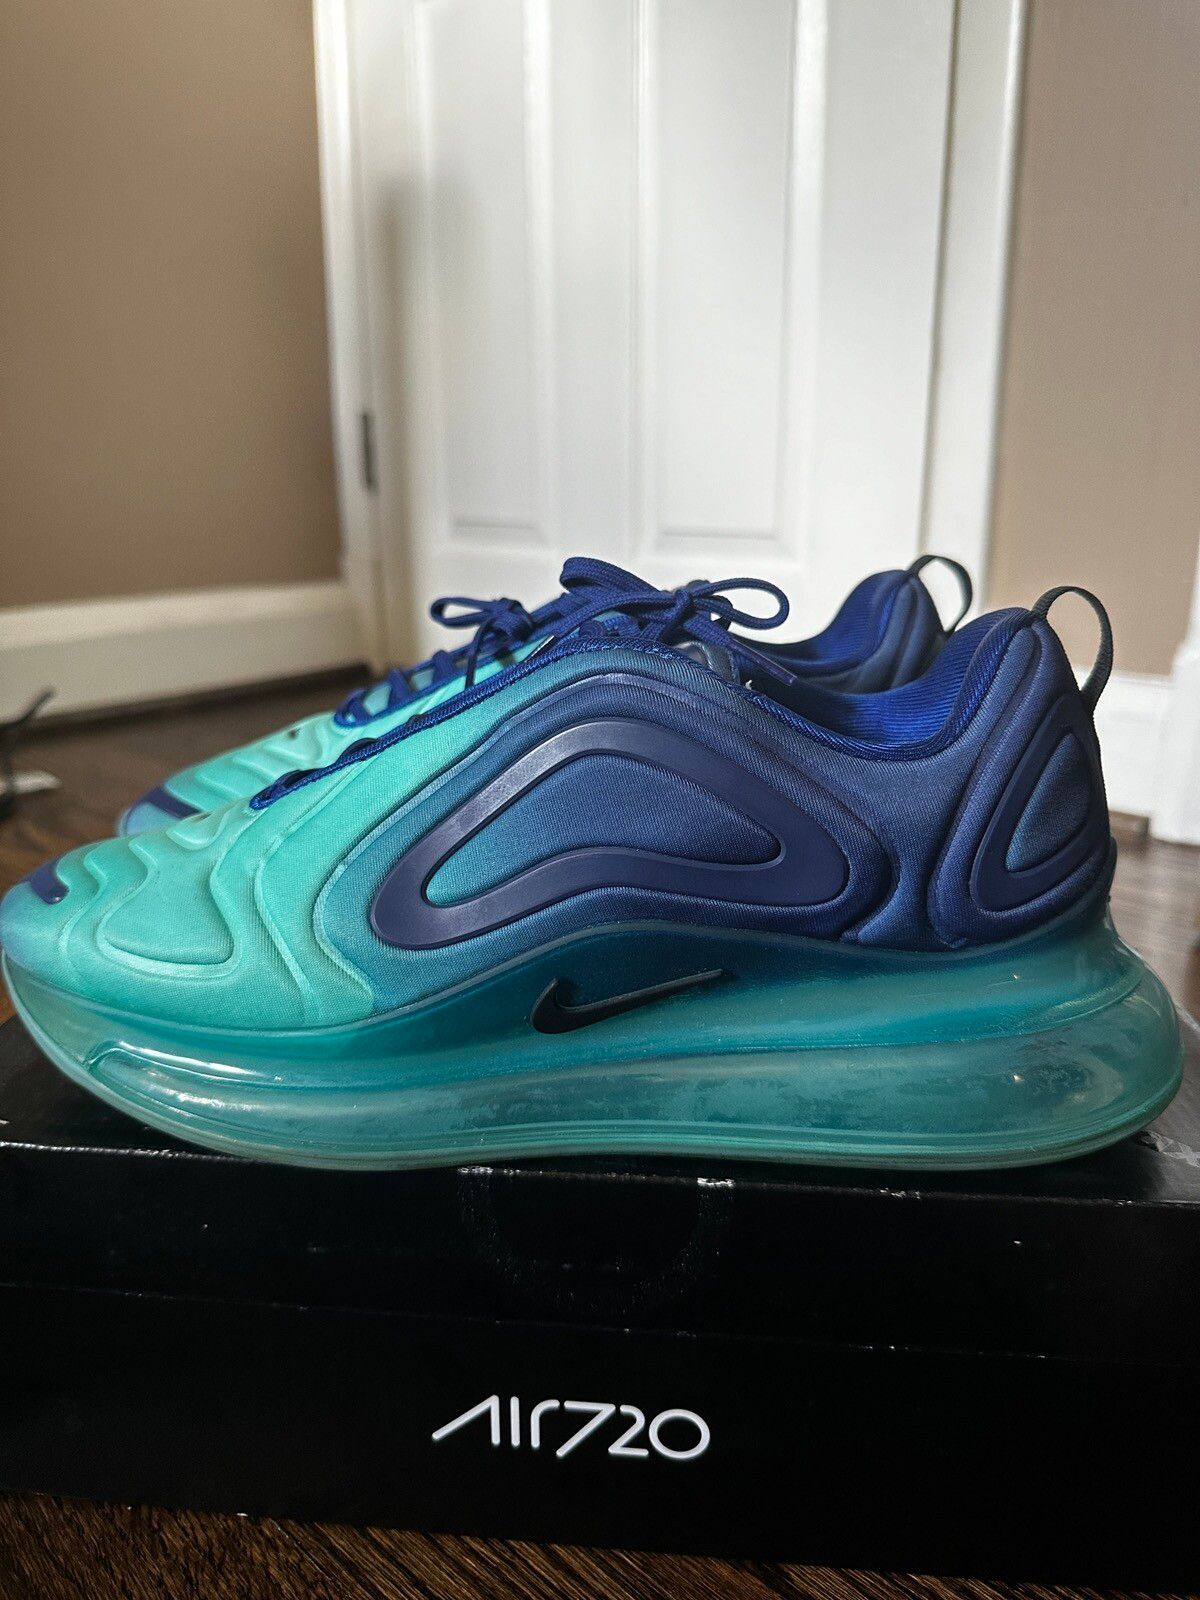 Nike Air Max 720 Sea Forest Size US 10.5 / EU 43-44 - 2 Preview